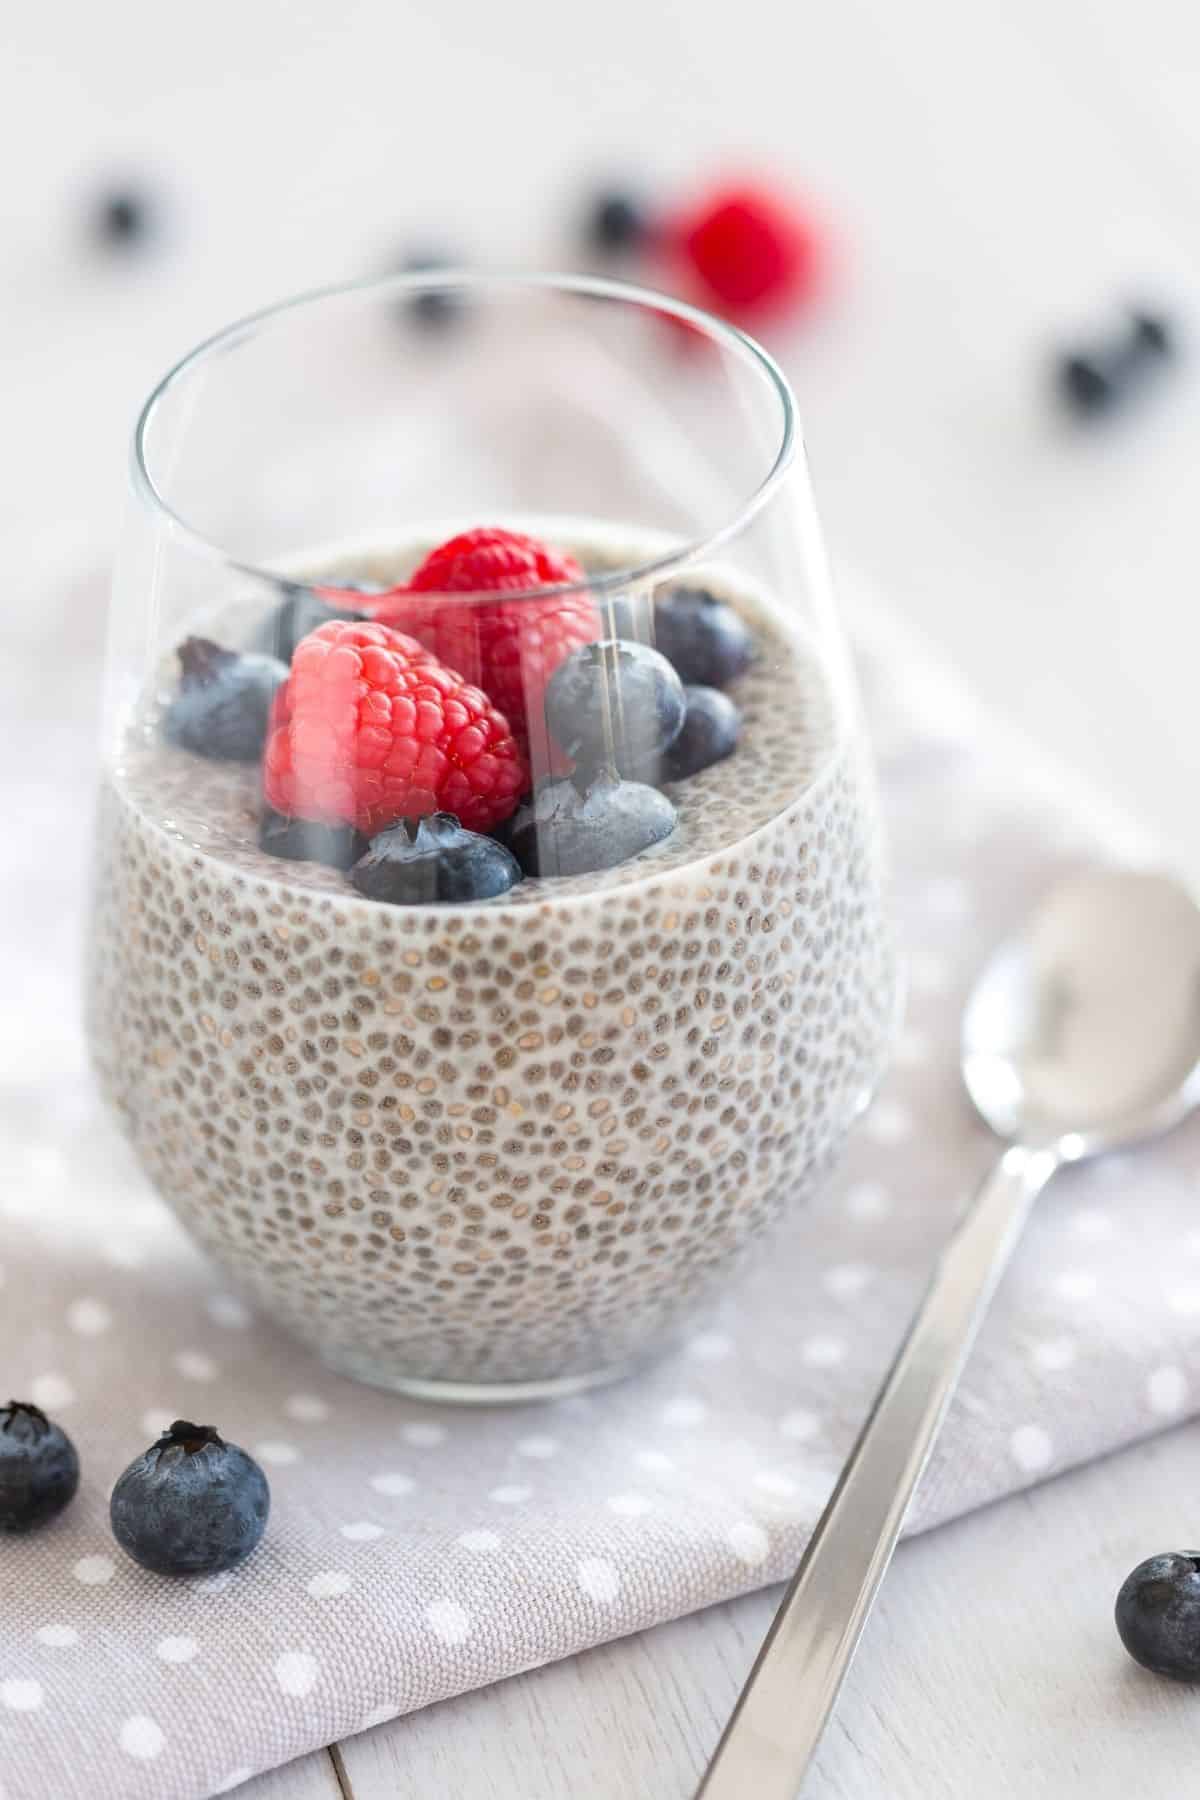 chia pudding with berries on top.